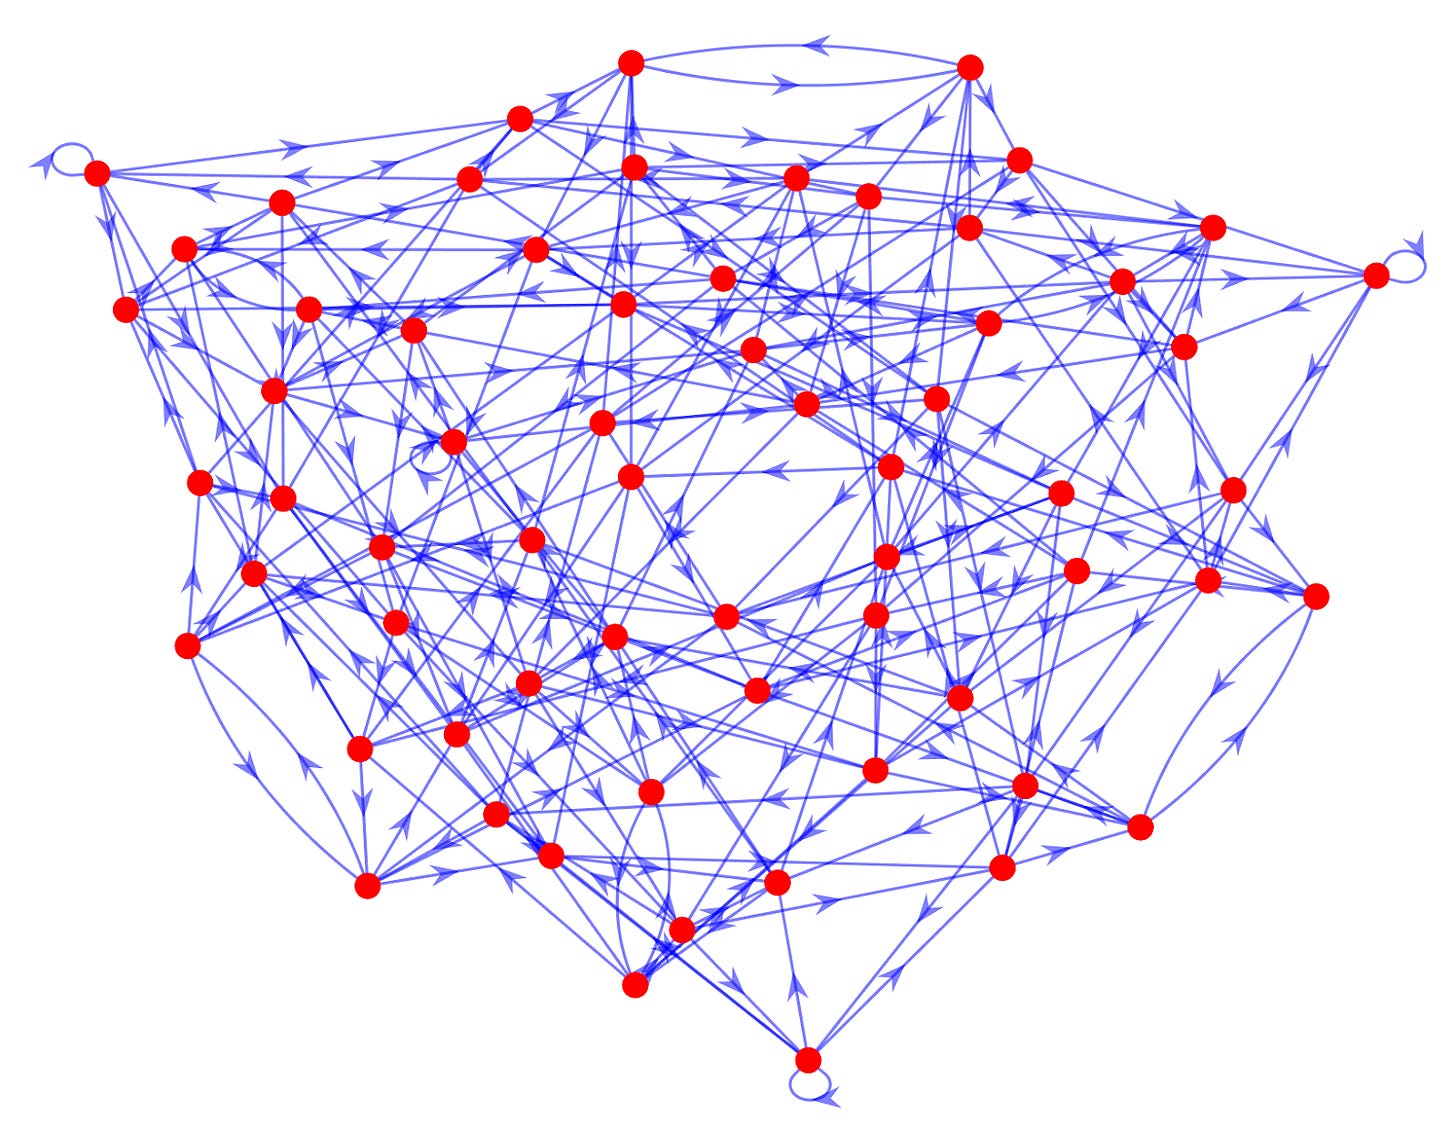 A directed graph showing 64 red nodes and a whole lot of blue arrows between them.